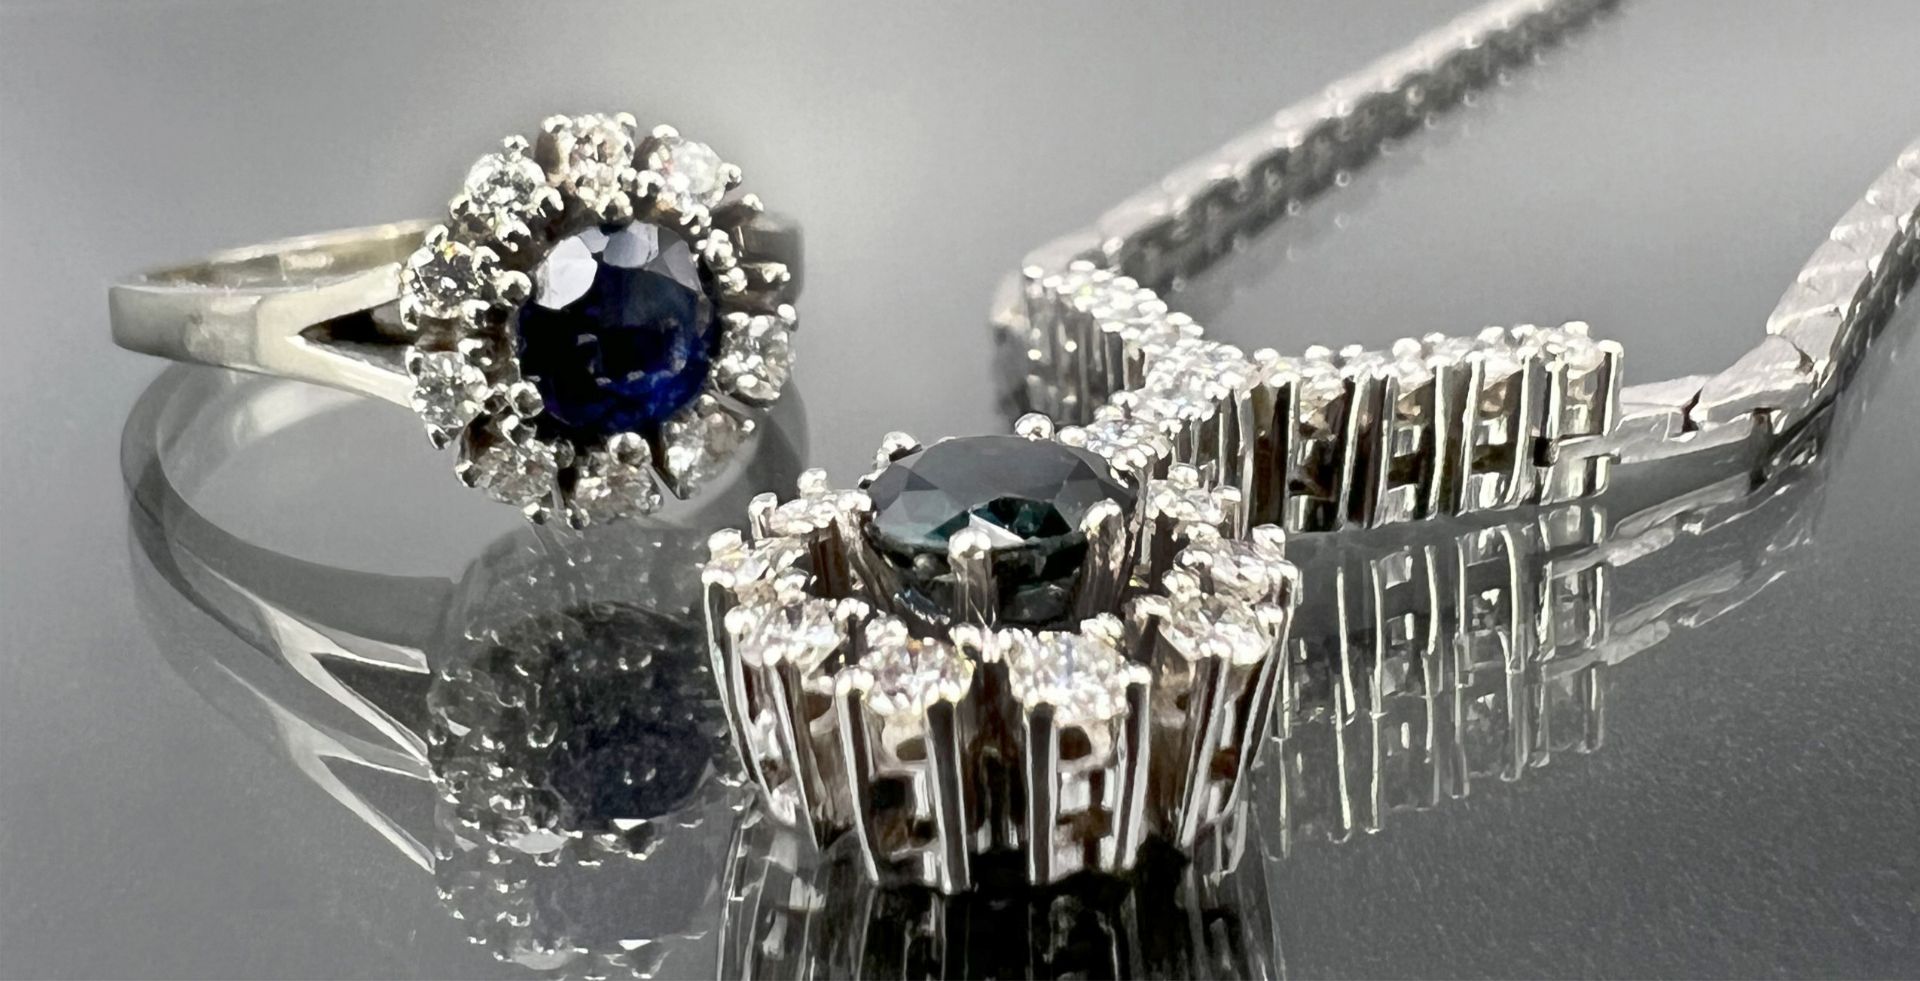 Jewellery set 585 white gold. Necklace and ring with sapphires and diamonds.